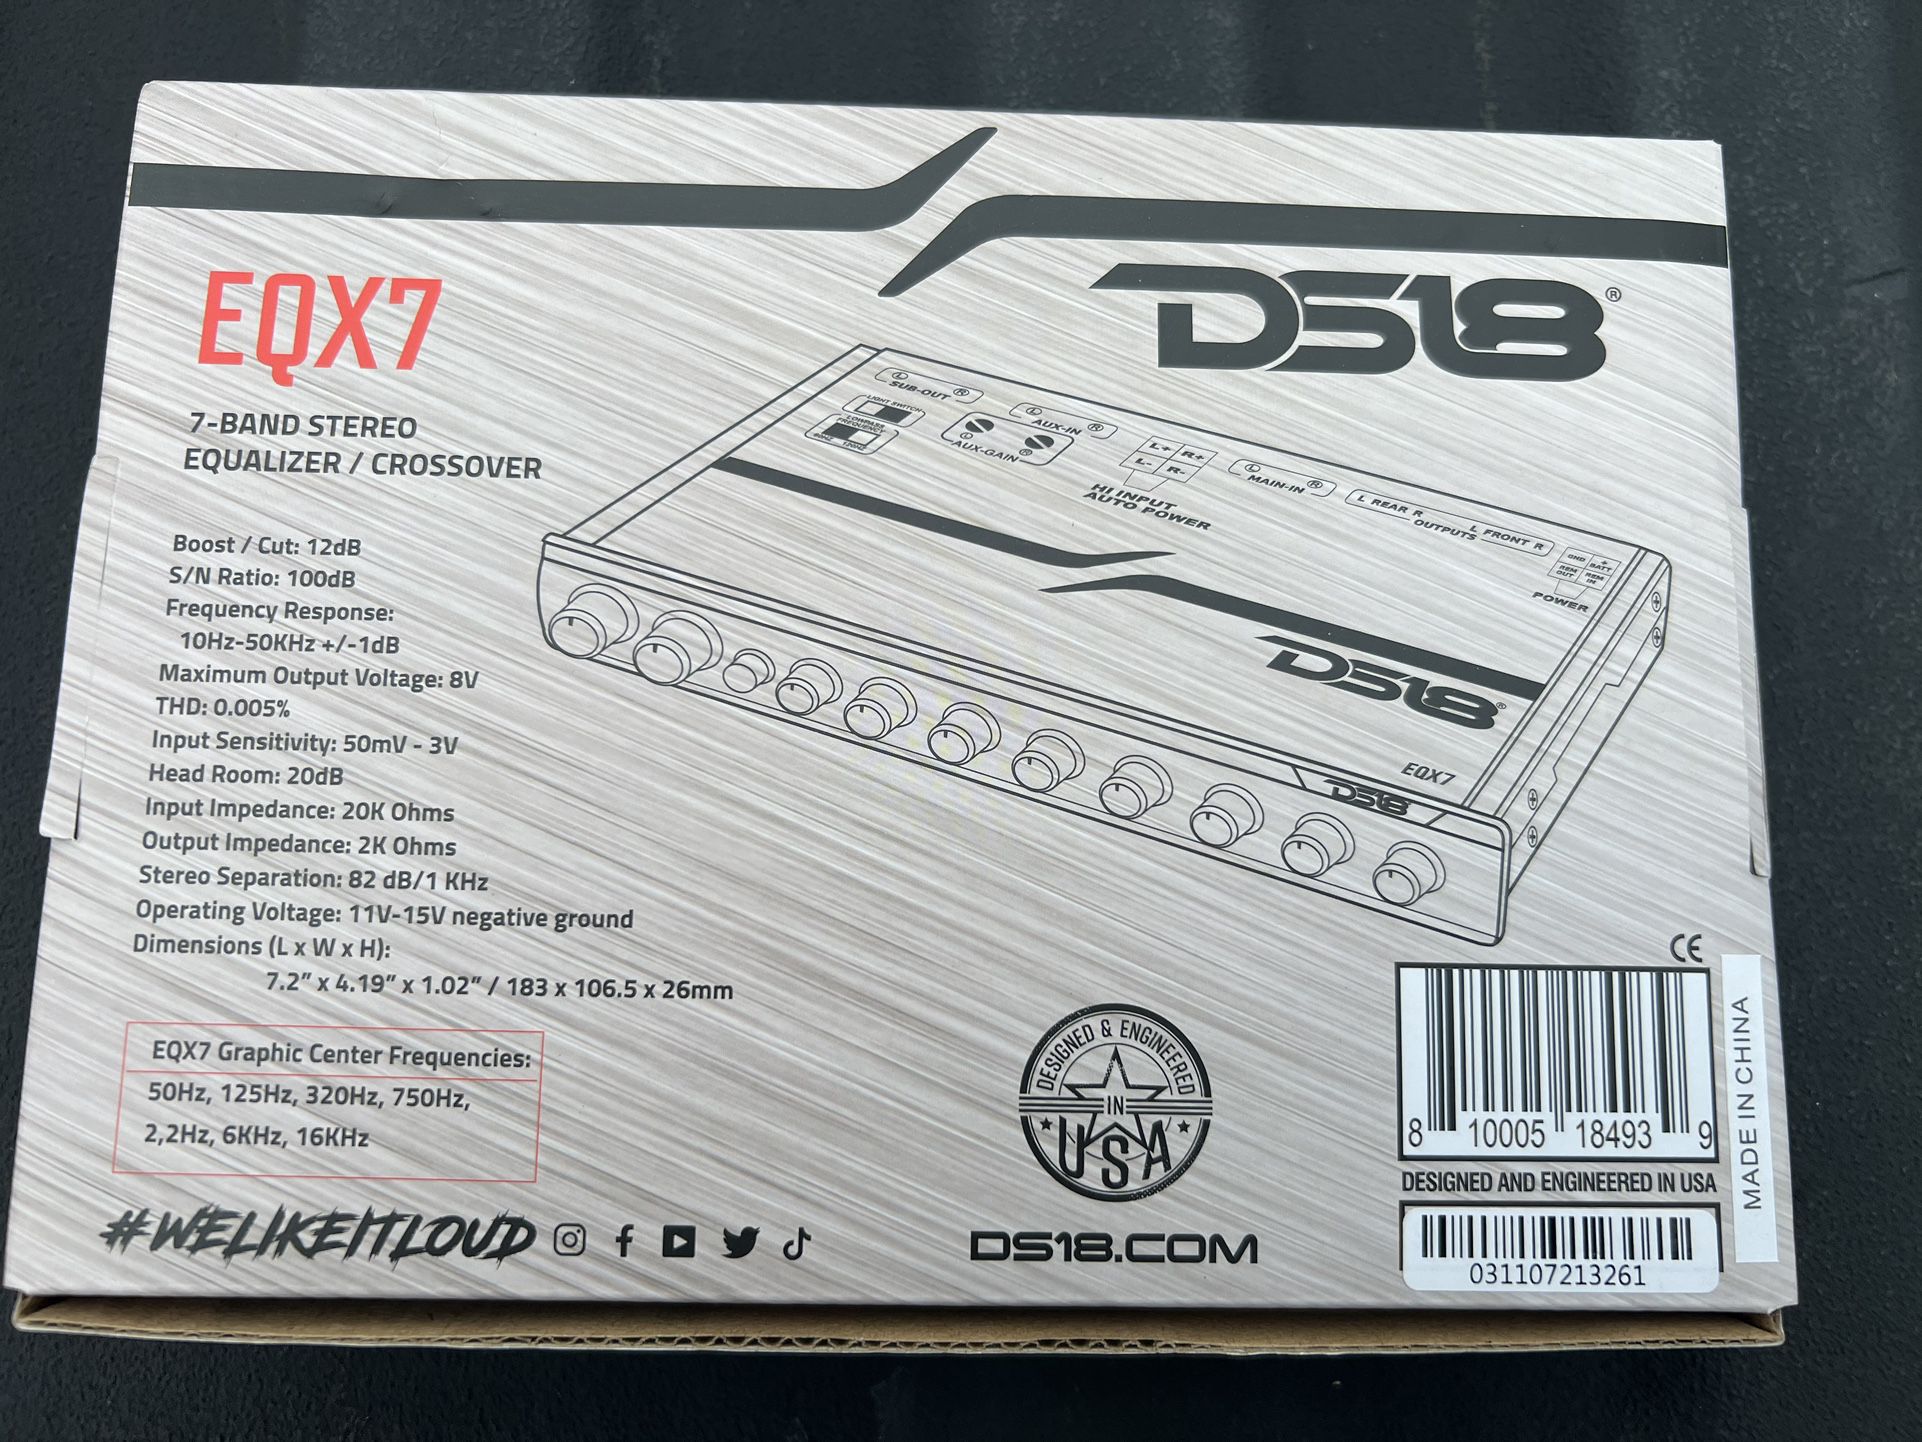 DS18 EQX7 BRAND NEW 7-BAND EQUALIZER/CROSSOVER 8V PREOUTS 